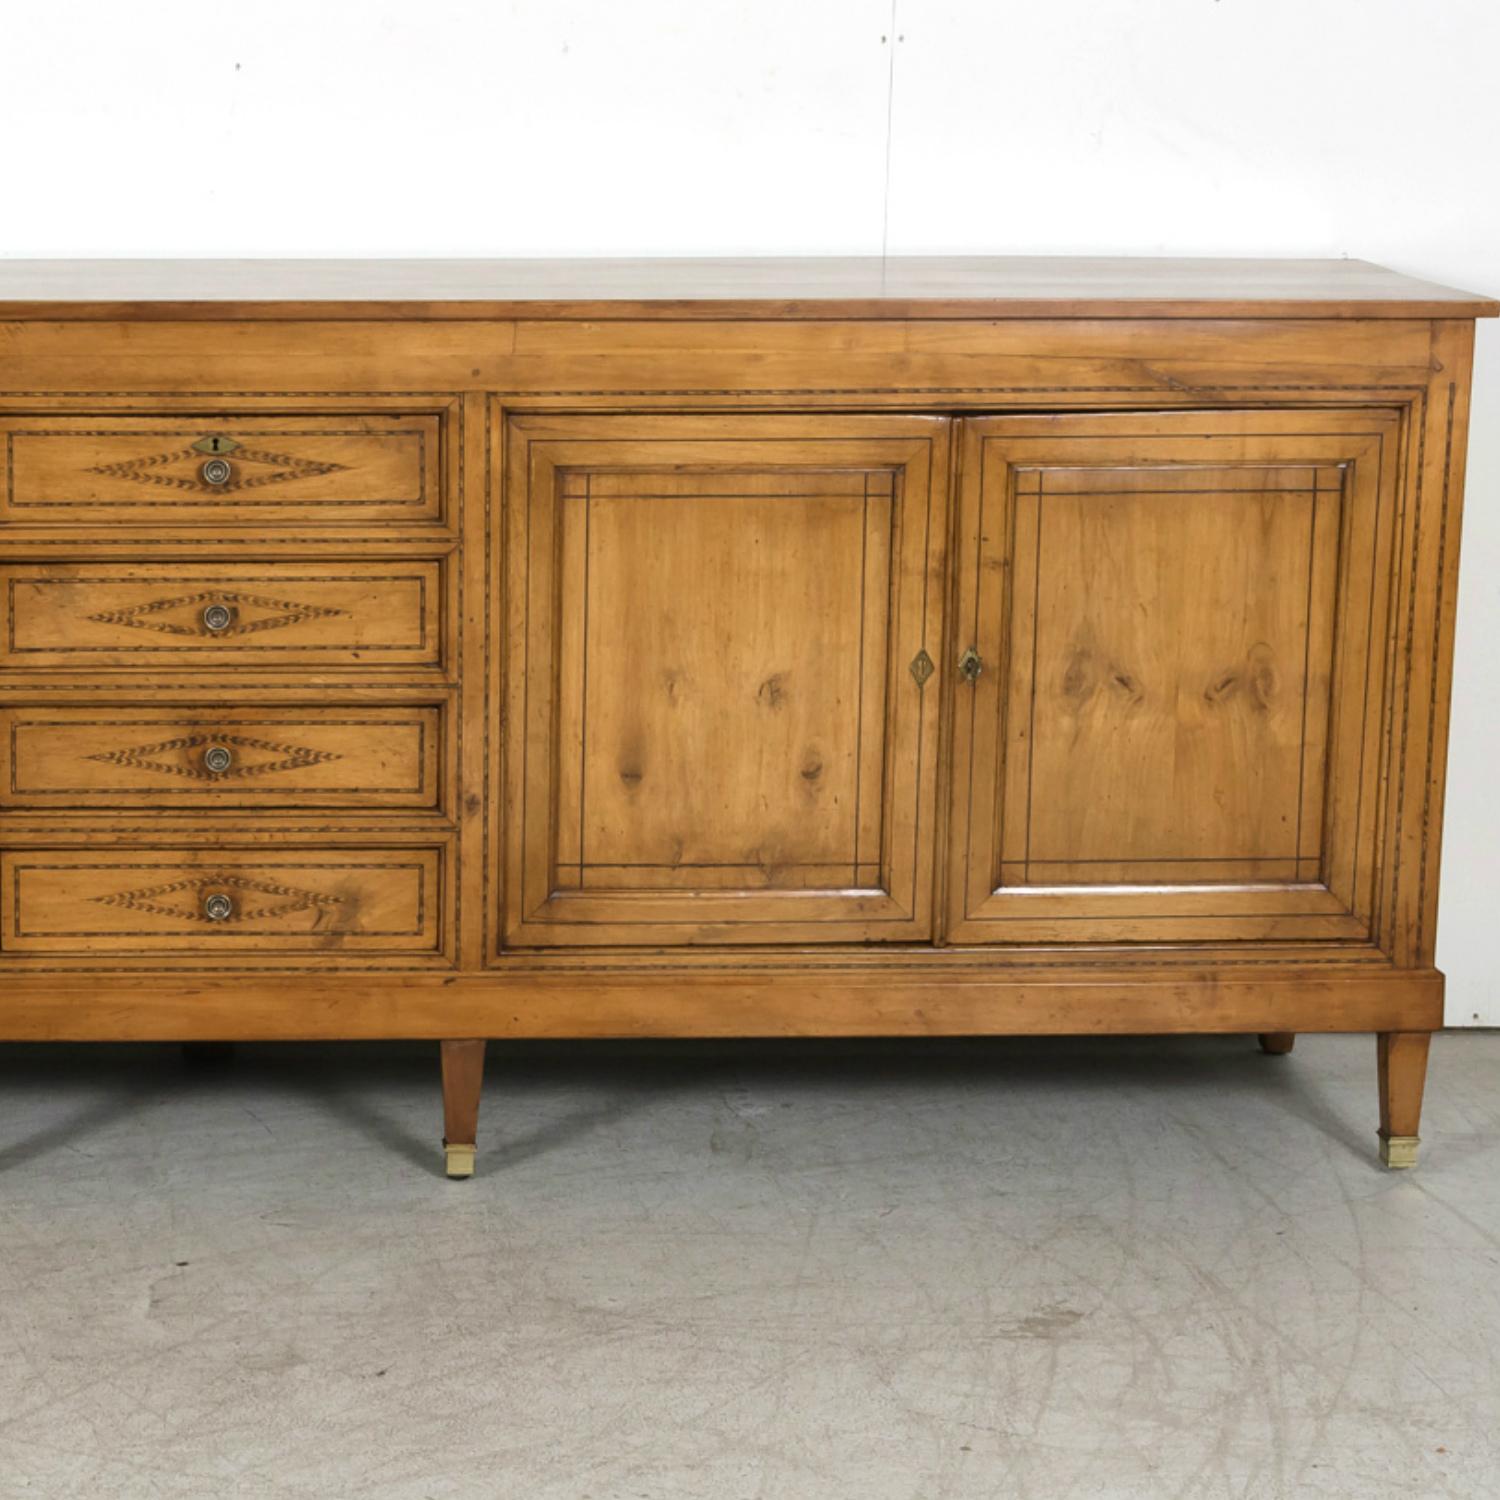  19th Century French Louis XVI Style Cherry Enfilade Buffet with Fruitwood Inlay 7